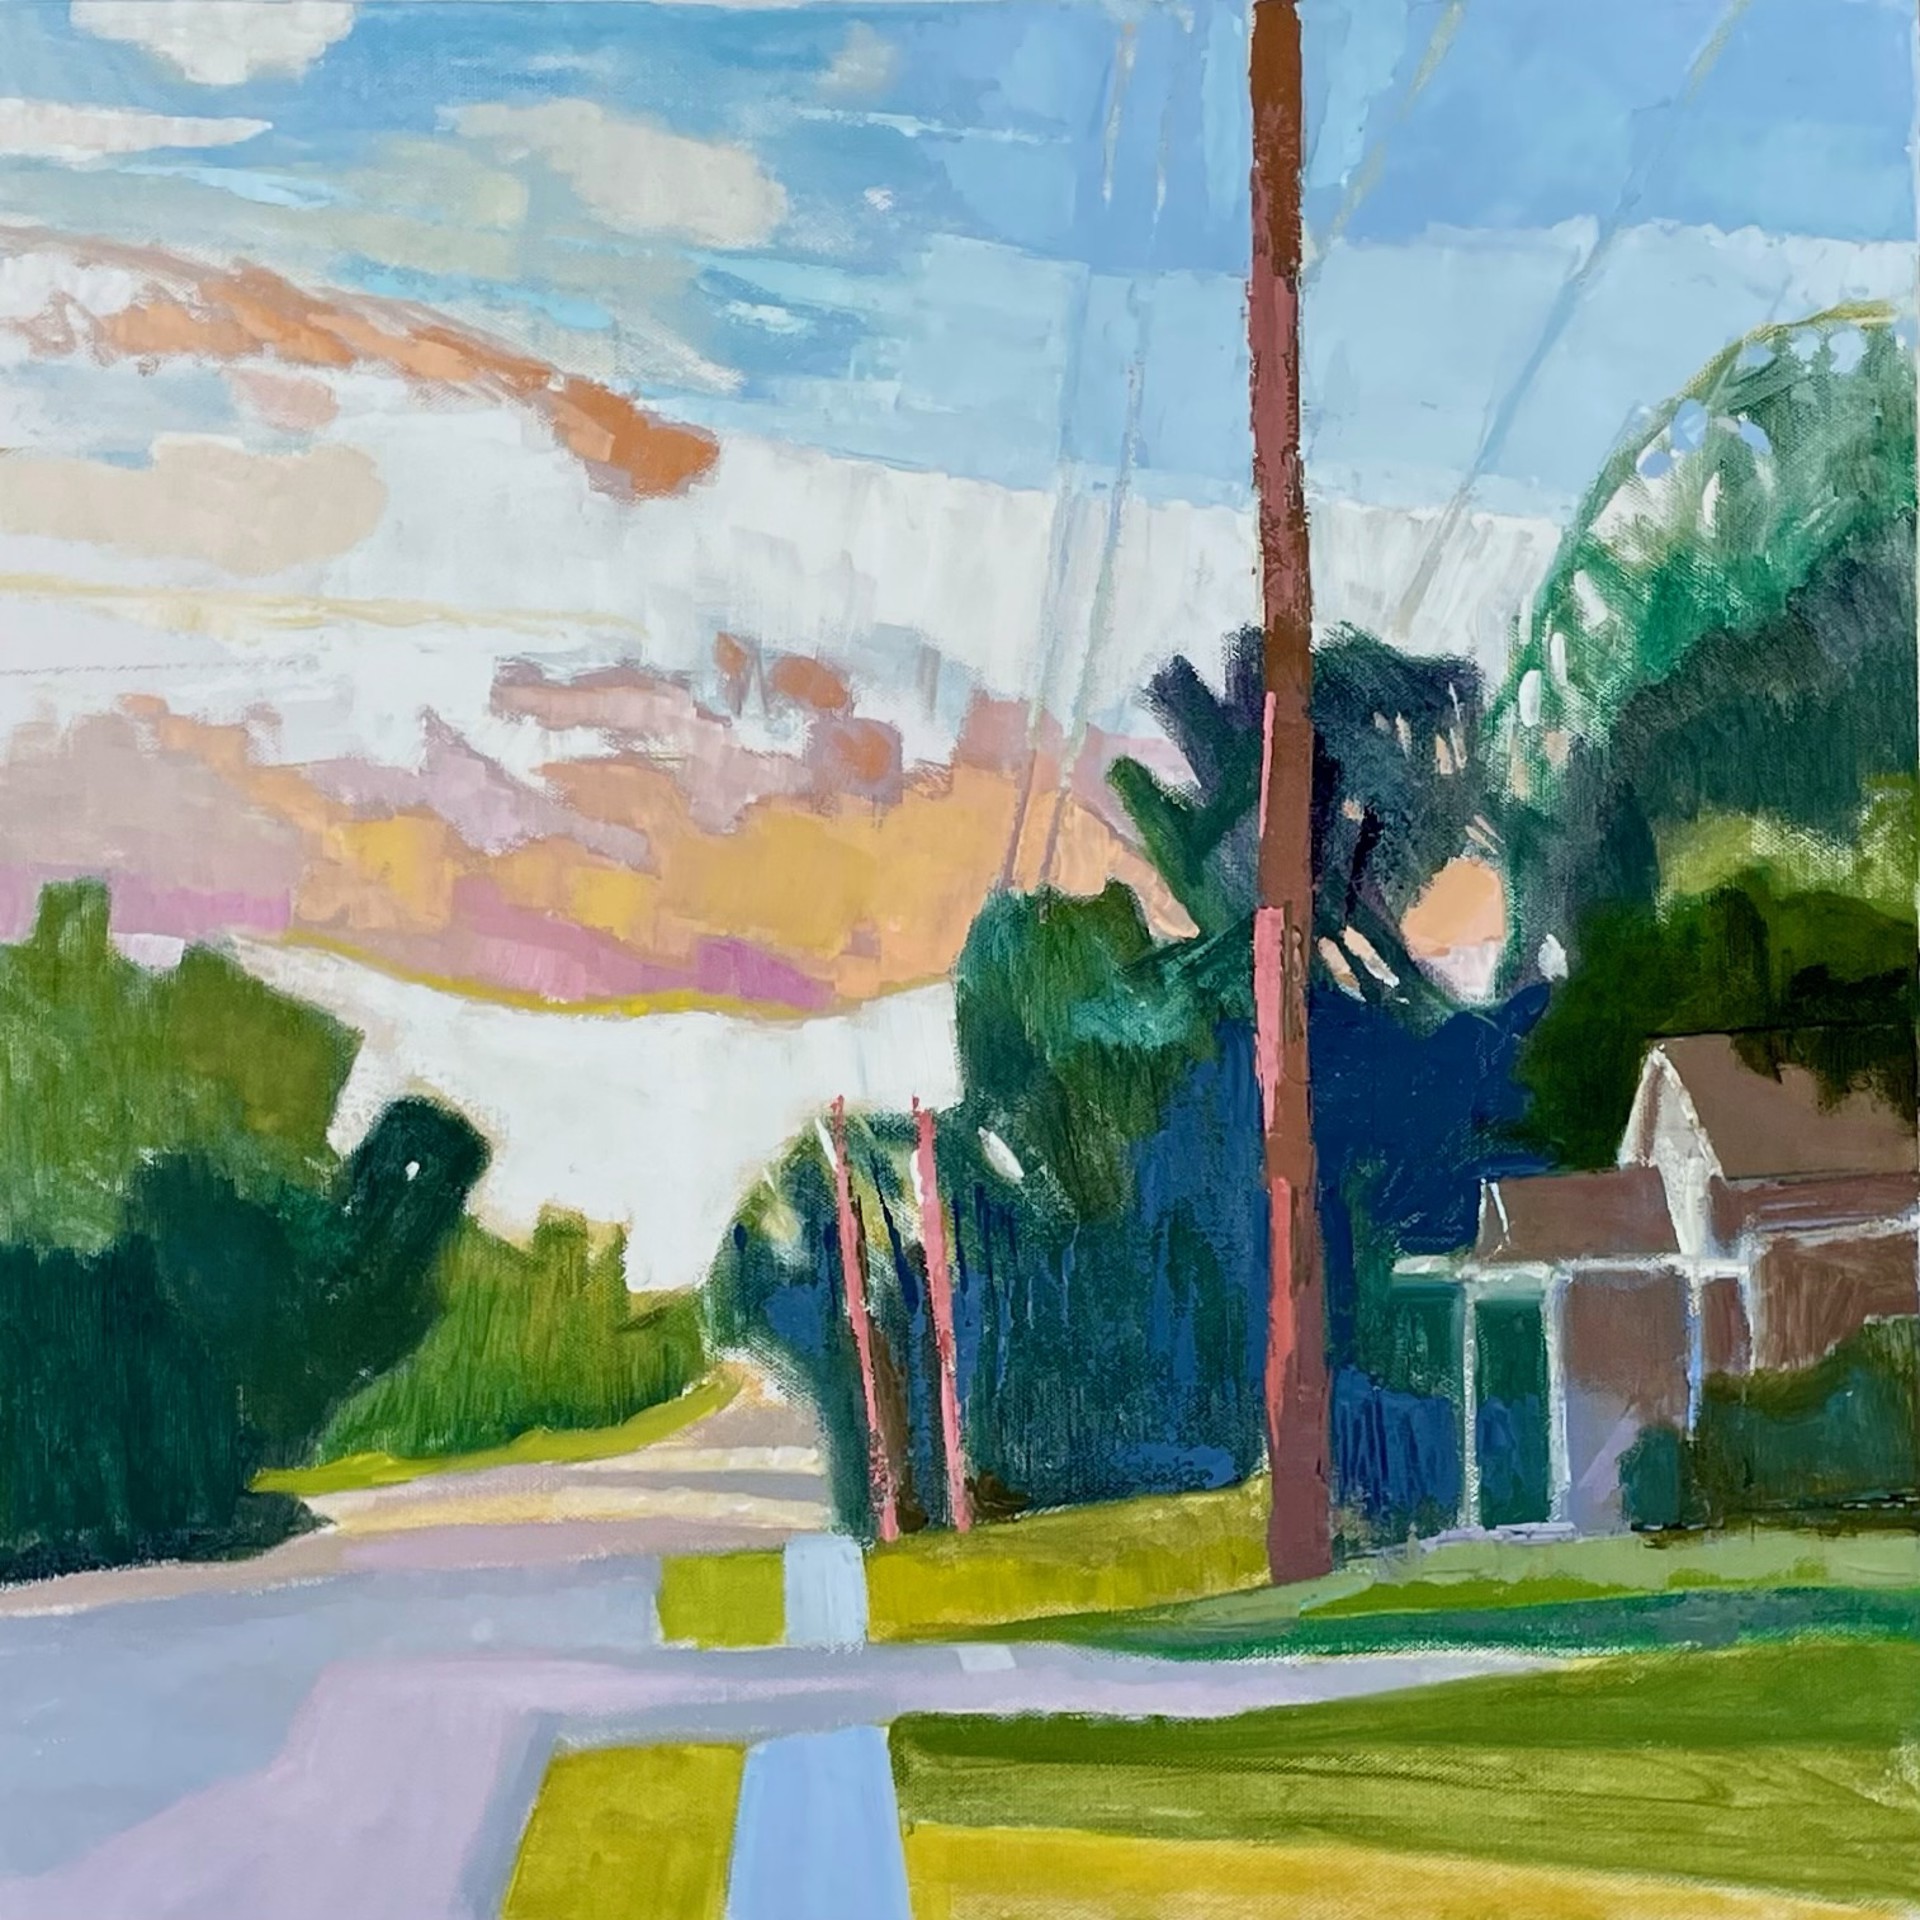 Evening Streetscape by Maggie Shepherd